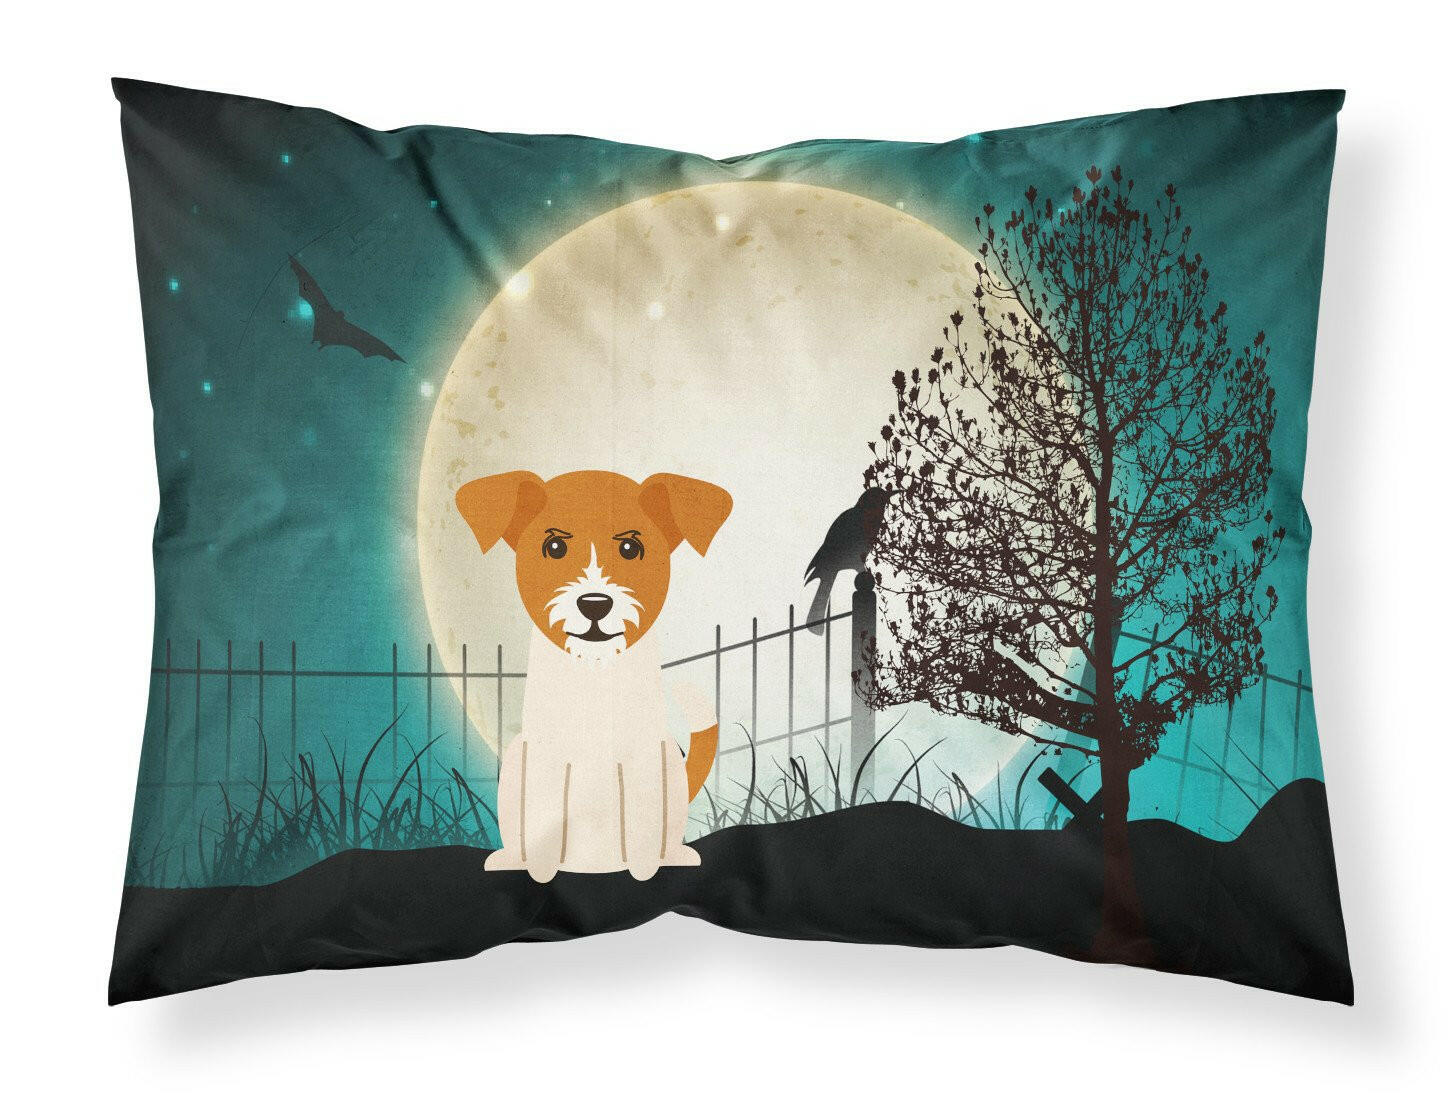 Halloween Scary Jack Russell Terrier Fabric Standard Pillowcase BB2298PILLOWCASE by Caroline's Treasures